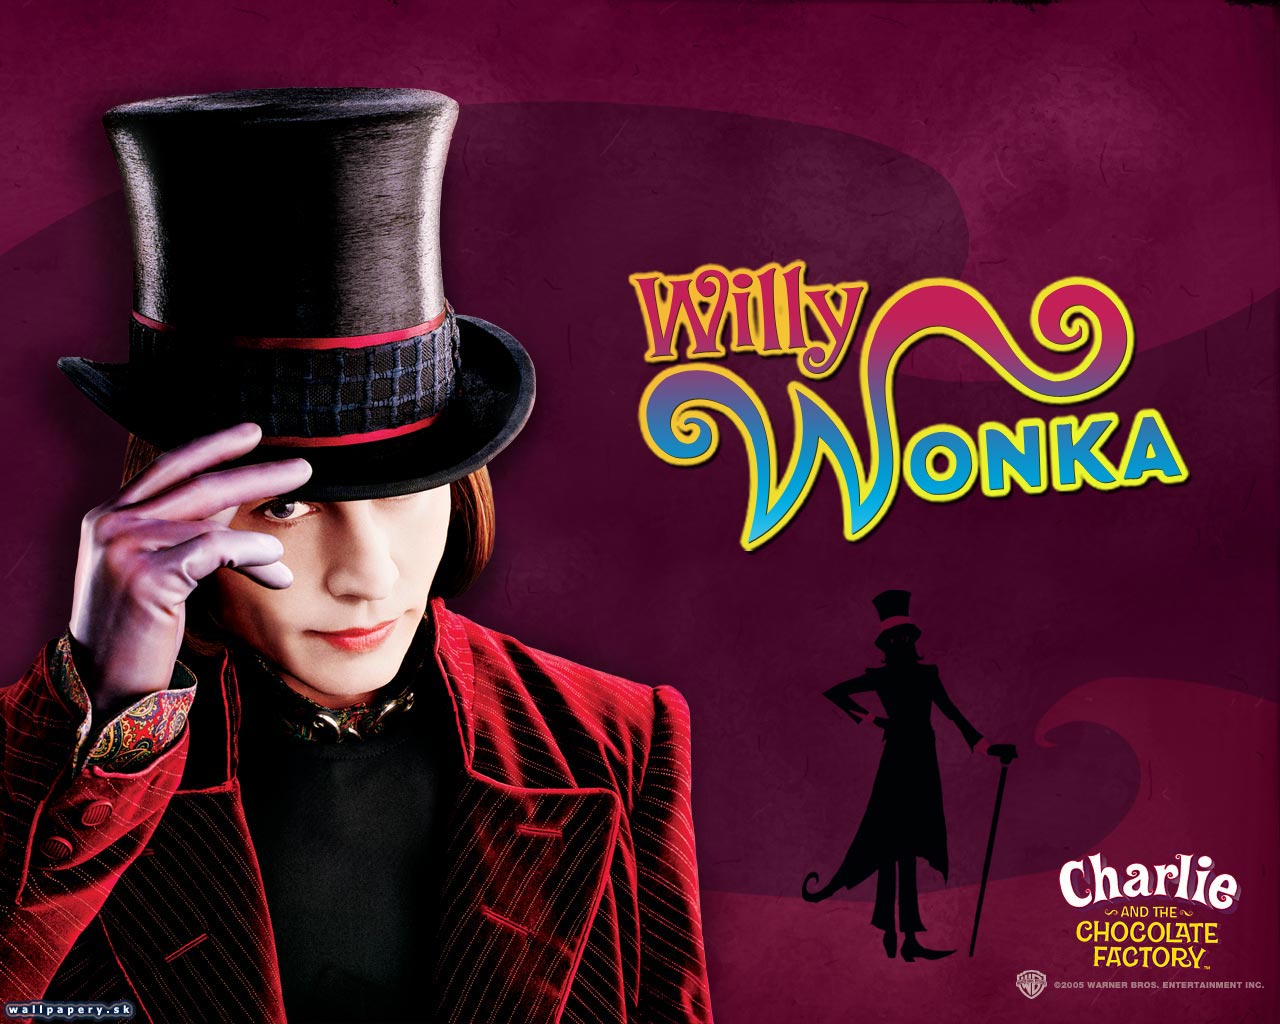 Charlie and the Chocolate Factory - wallpaper 1